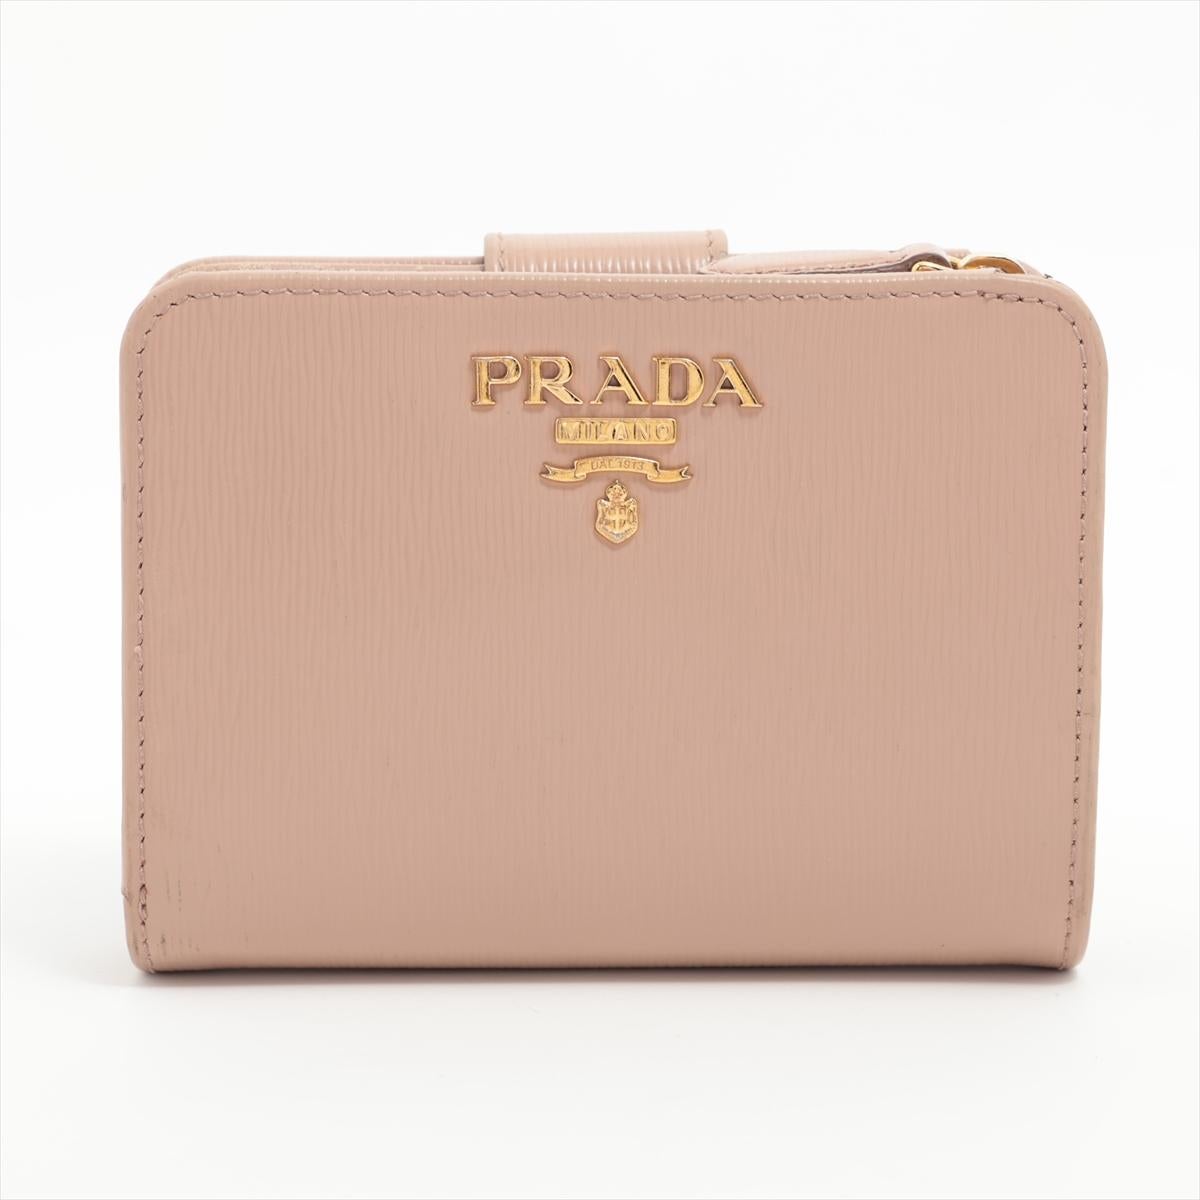 The Prada Vitello Leather Compact Wallet in Beige is a testament to the brand's commitment to modern elegance and functionality. Crafted from luxurious Vitello leather, renowned for its smooth texture and durability, the compact wallet effortlessly